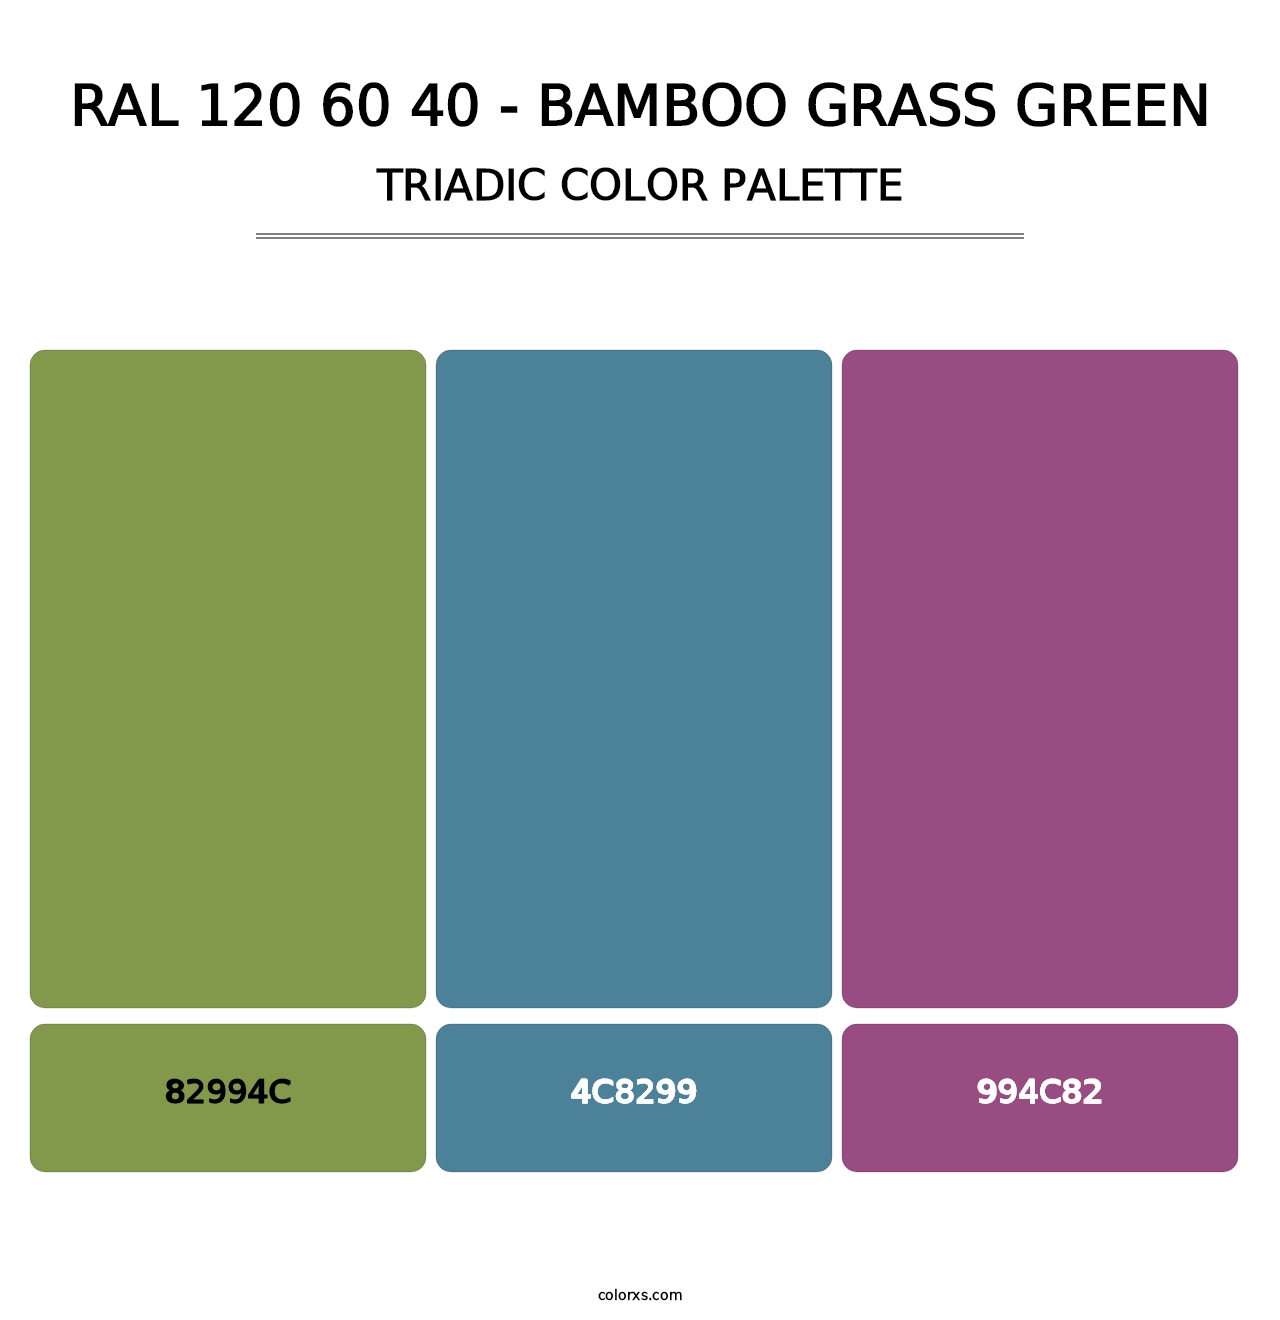 RAL 120 60 40 - Bamboo Grass Green - Triadic Color Palette